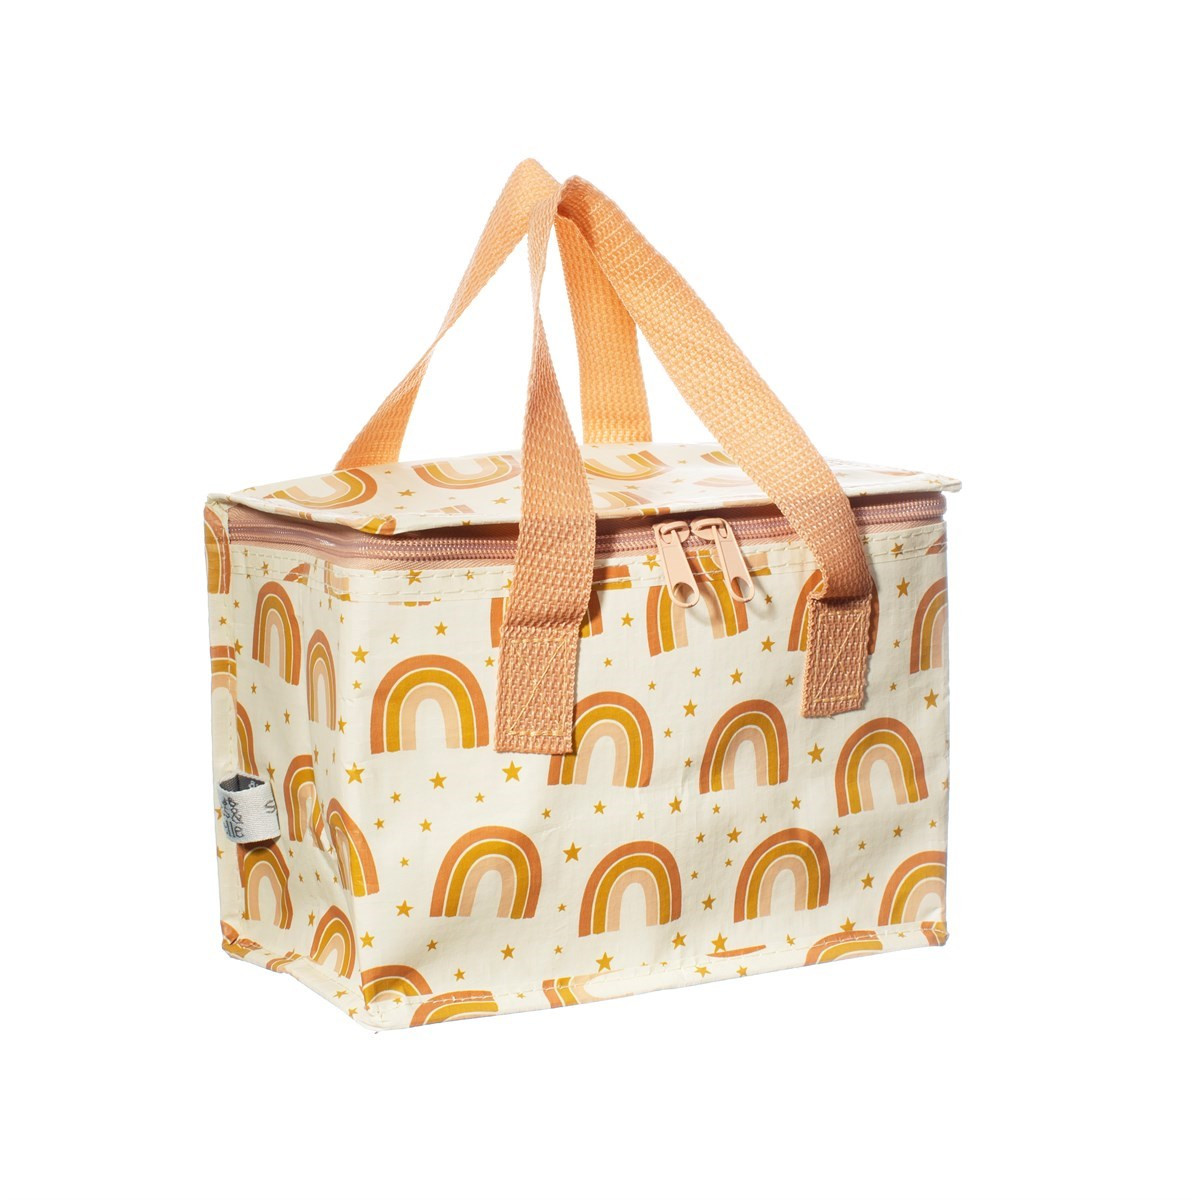 Sass & Belle Earth Rainbow Lunch Bag - Coral>